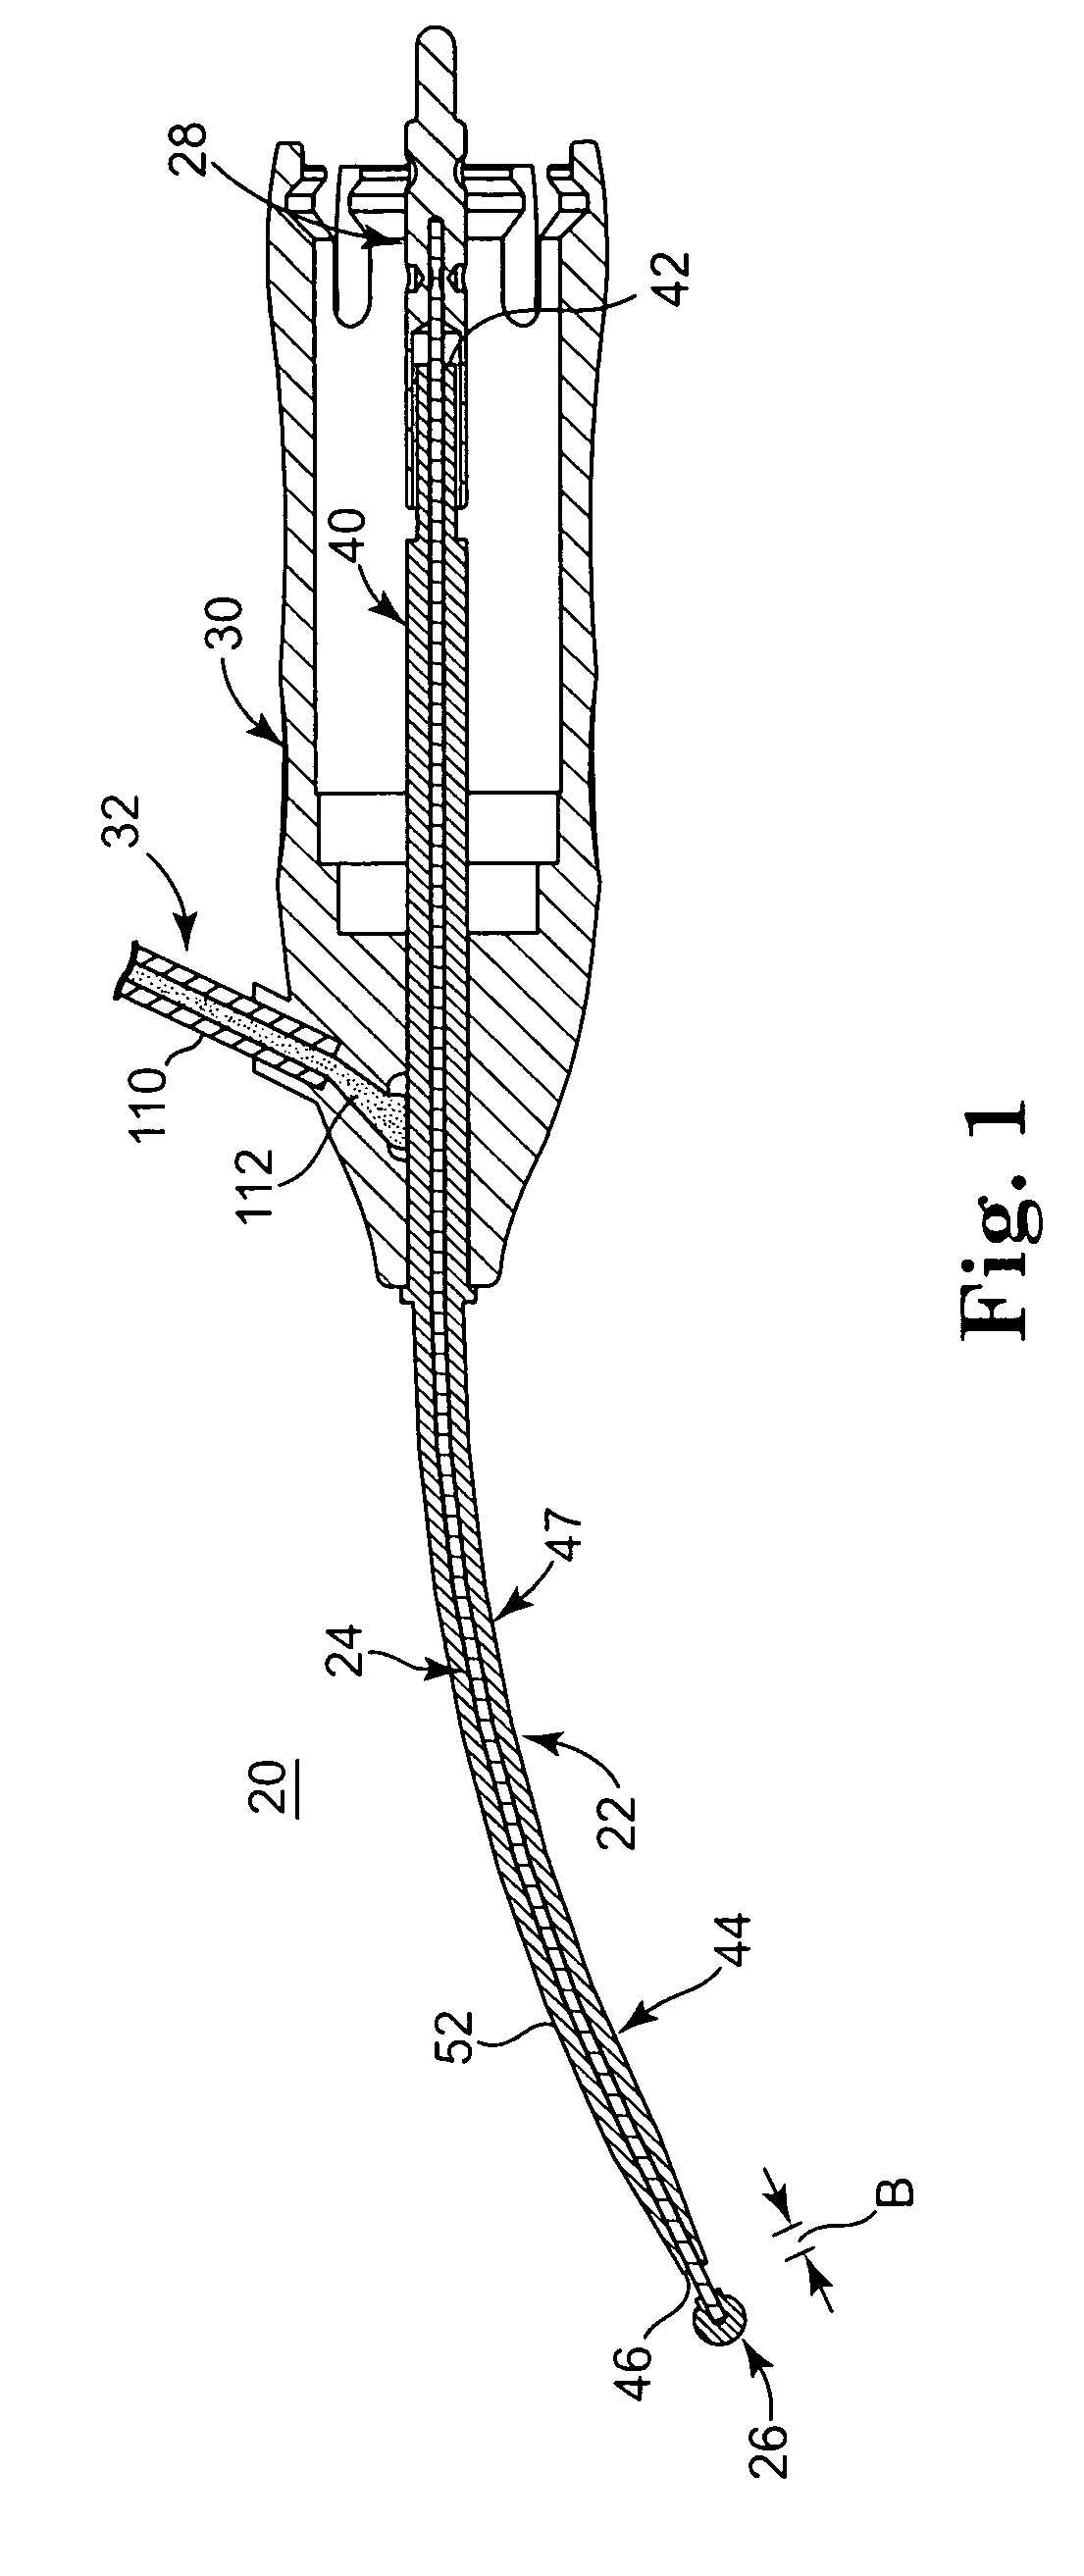 Micro-resecting and evoked potential monitoring system and method